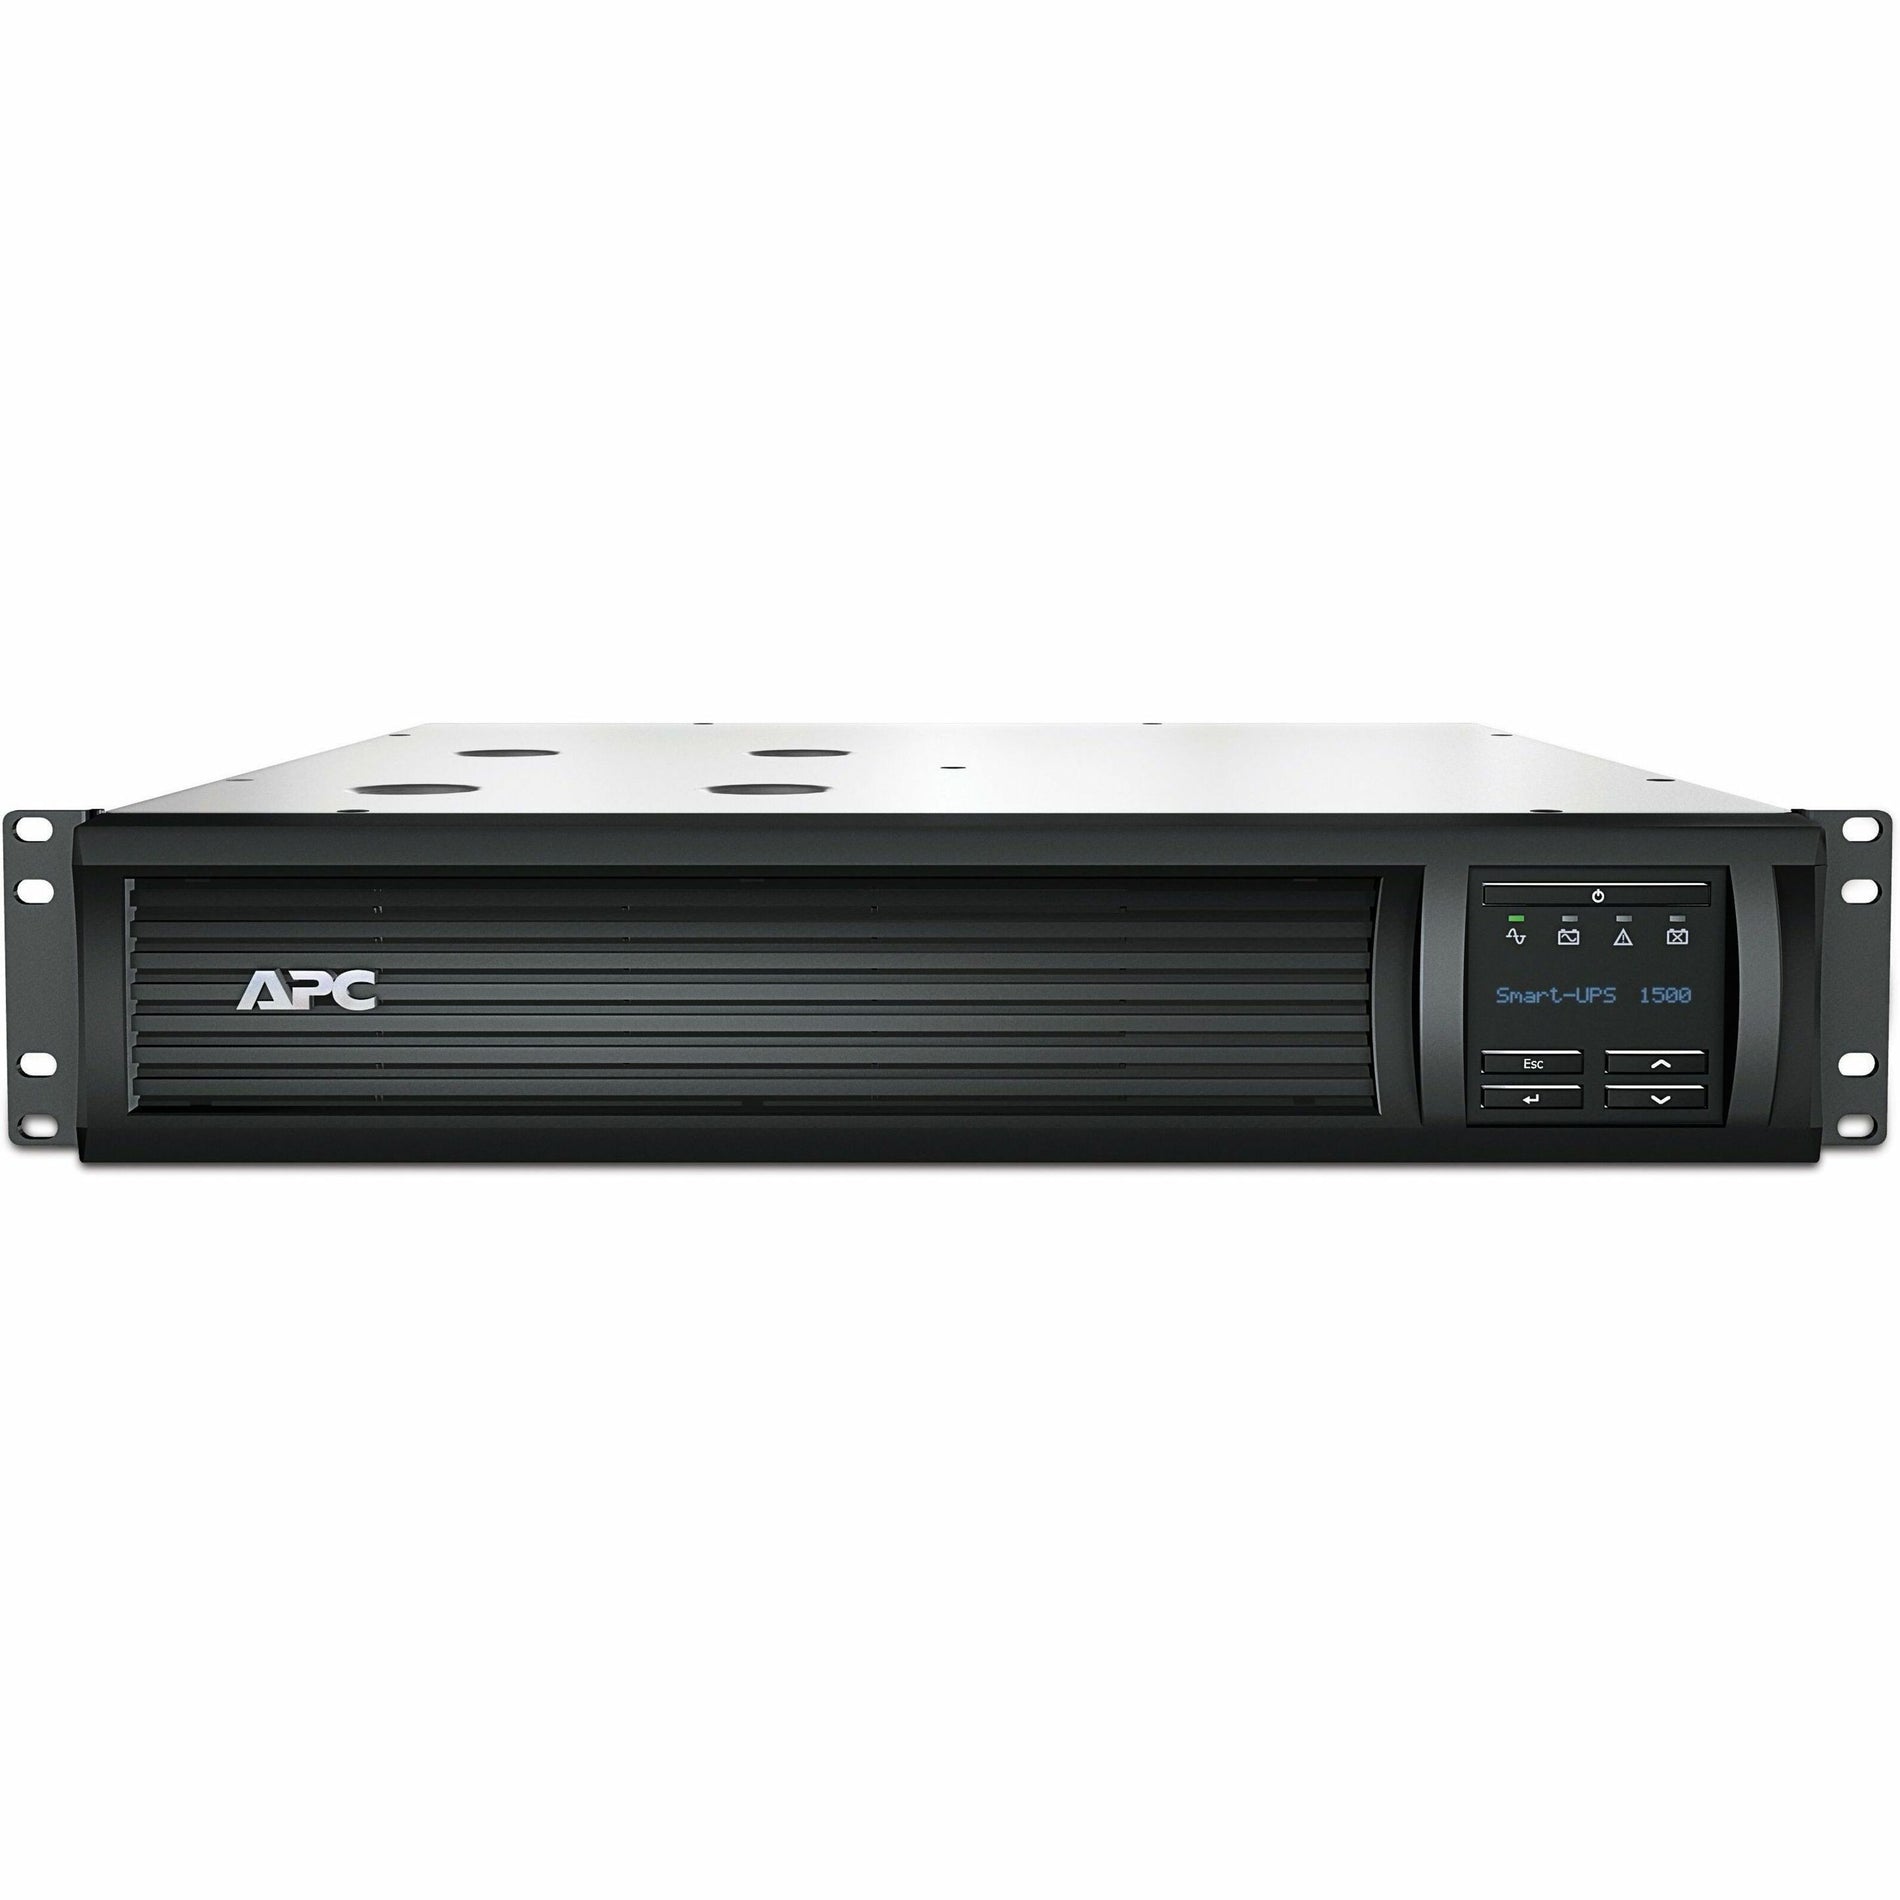 APC SMT1500R2X122 Smart-UPS 1500VA LCD RM 2U 120V with L5-15P, Backup Power Supply for Electronics